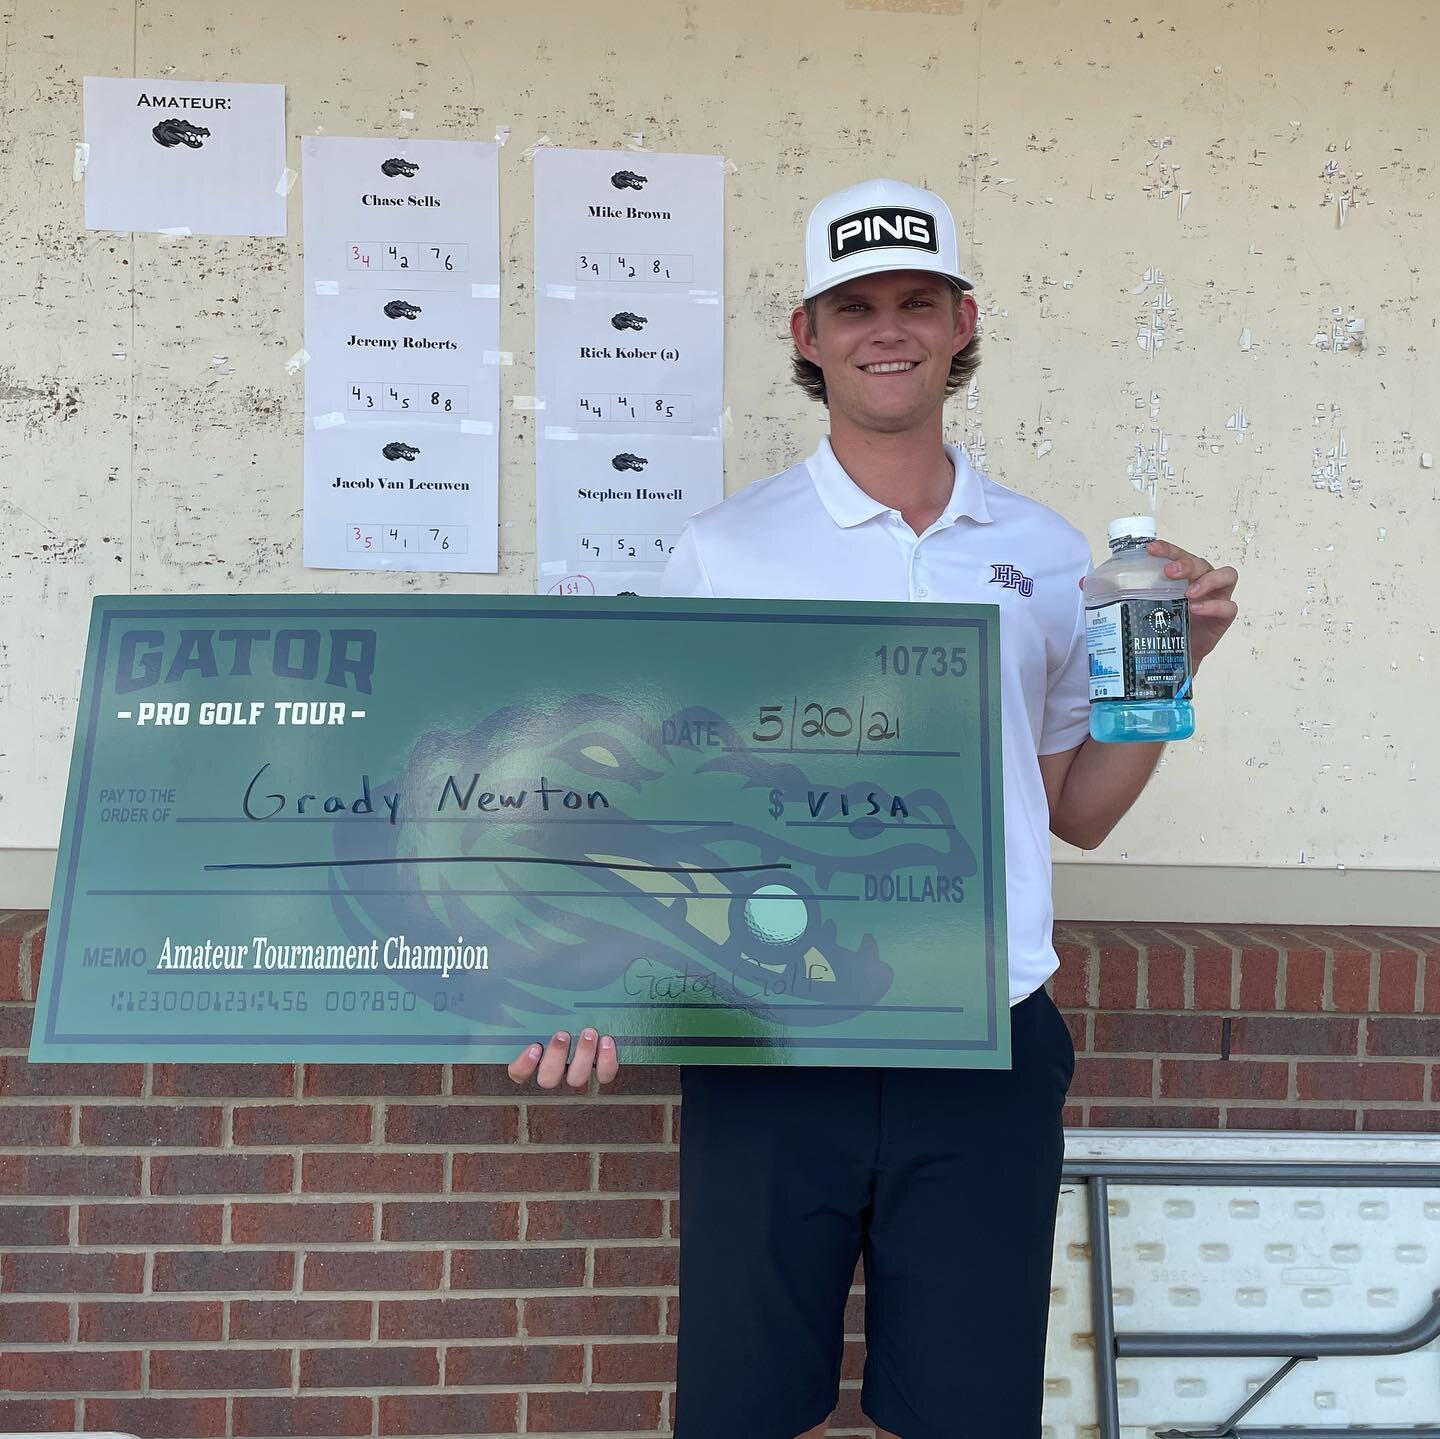 A special month for Zane Lewis. He grabbed his 1st Professional Win at NC State shooting -6 66!

Grady Newton won the Amateur Field with a -2 70! He is going into his Sophomore season at High Point University. Excited to begin having more college pla